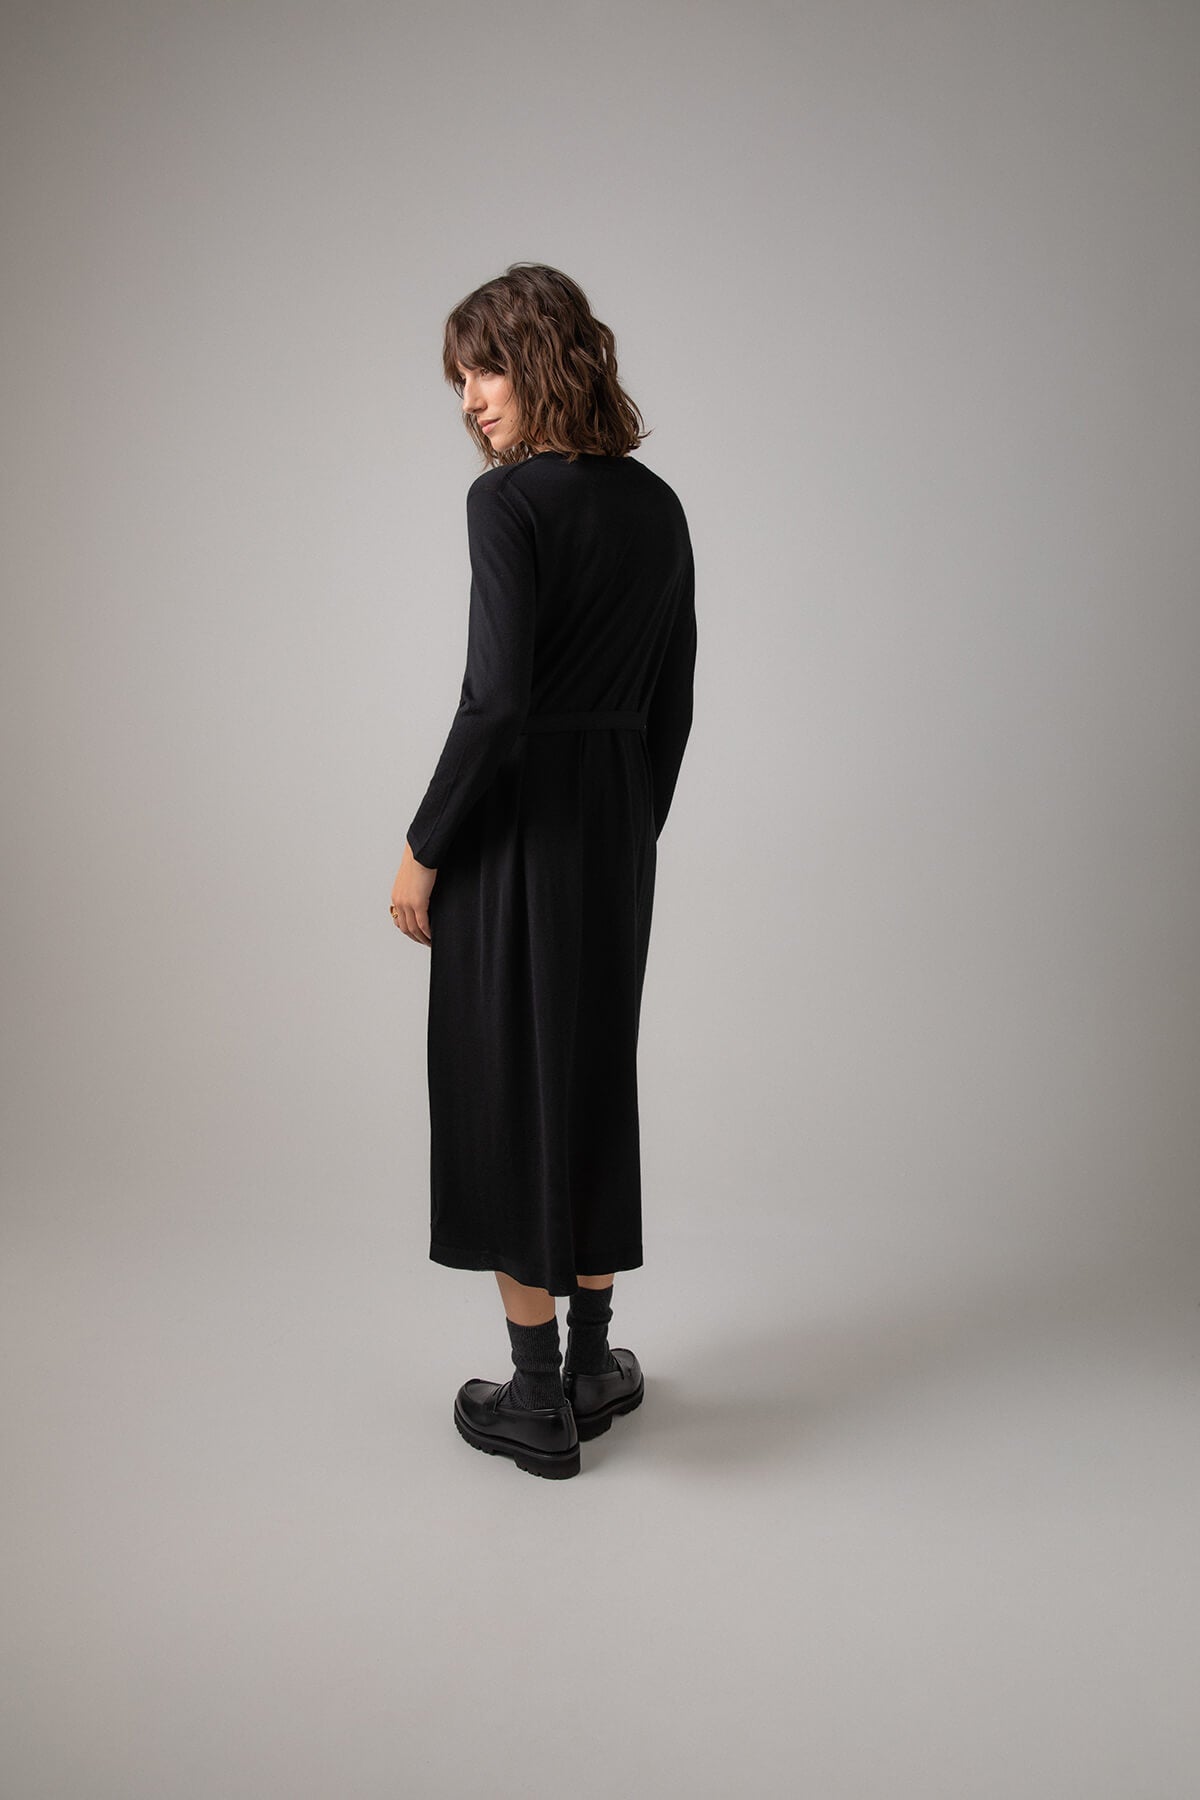 Back of Johnstons of Elgin Women's Superfine Merino Belted T-Shirt Dress in Black worn with Black Socks & Shoes on a grey background KDI00685SA7131